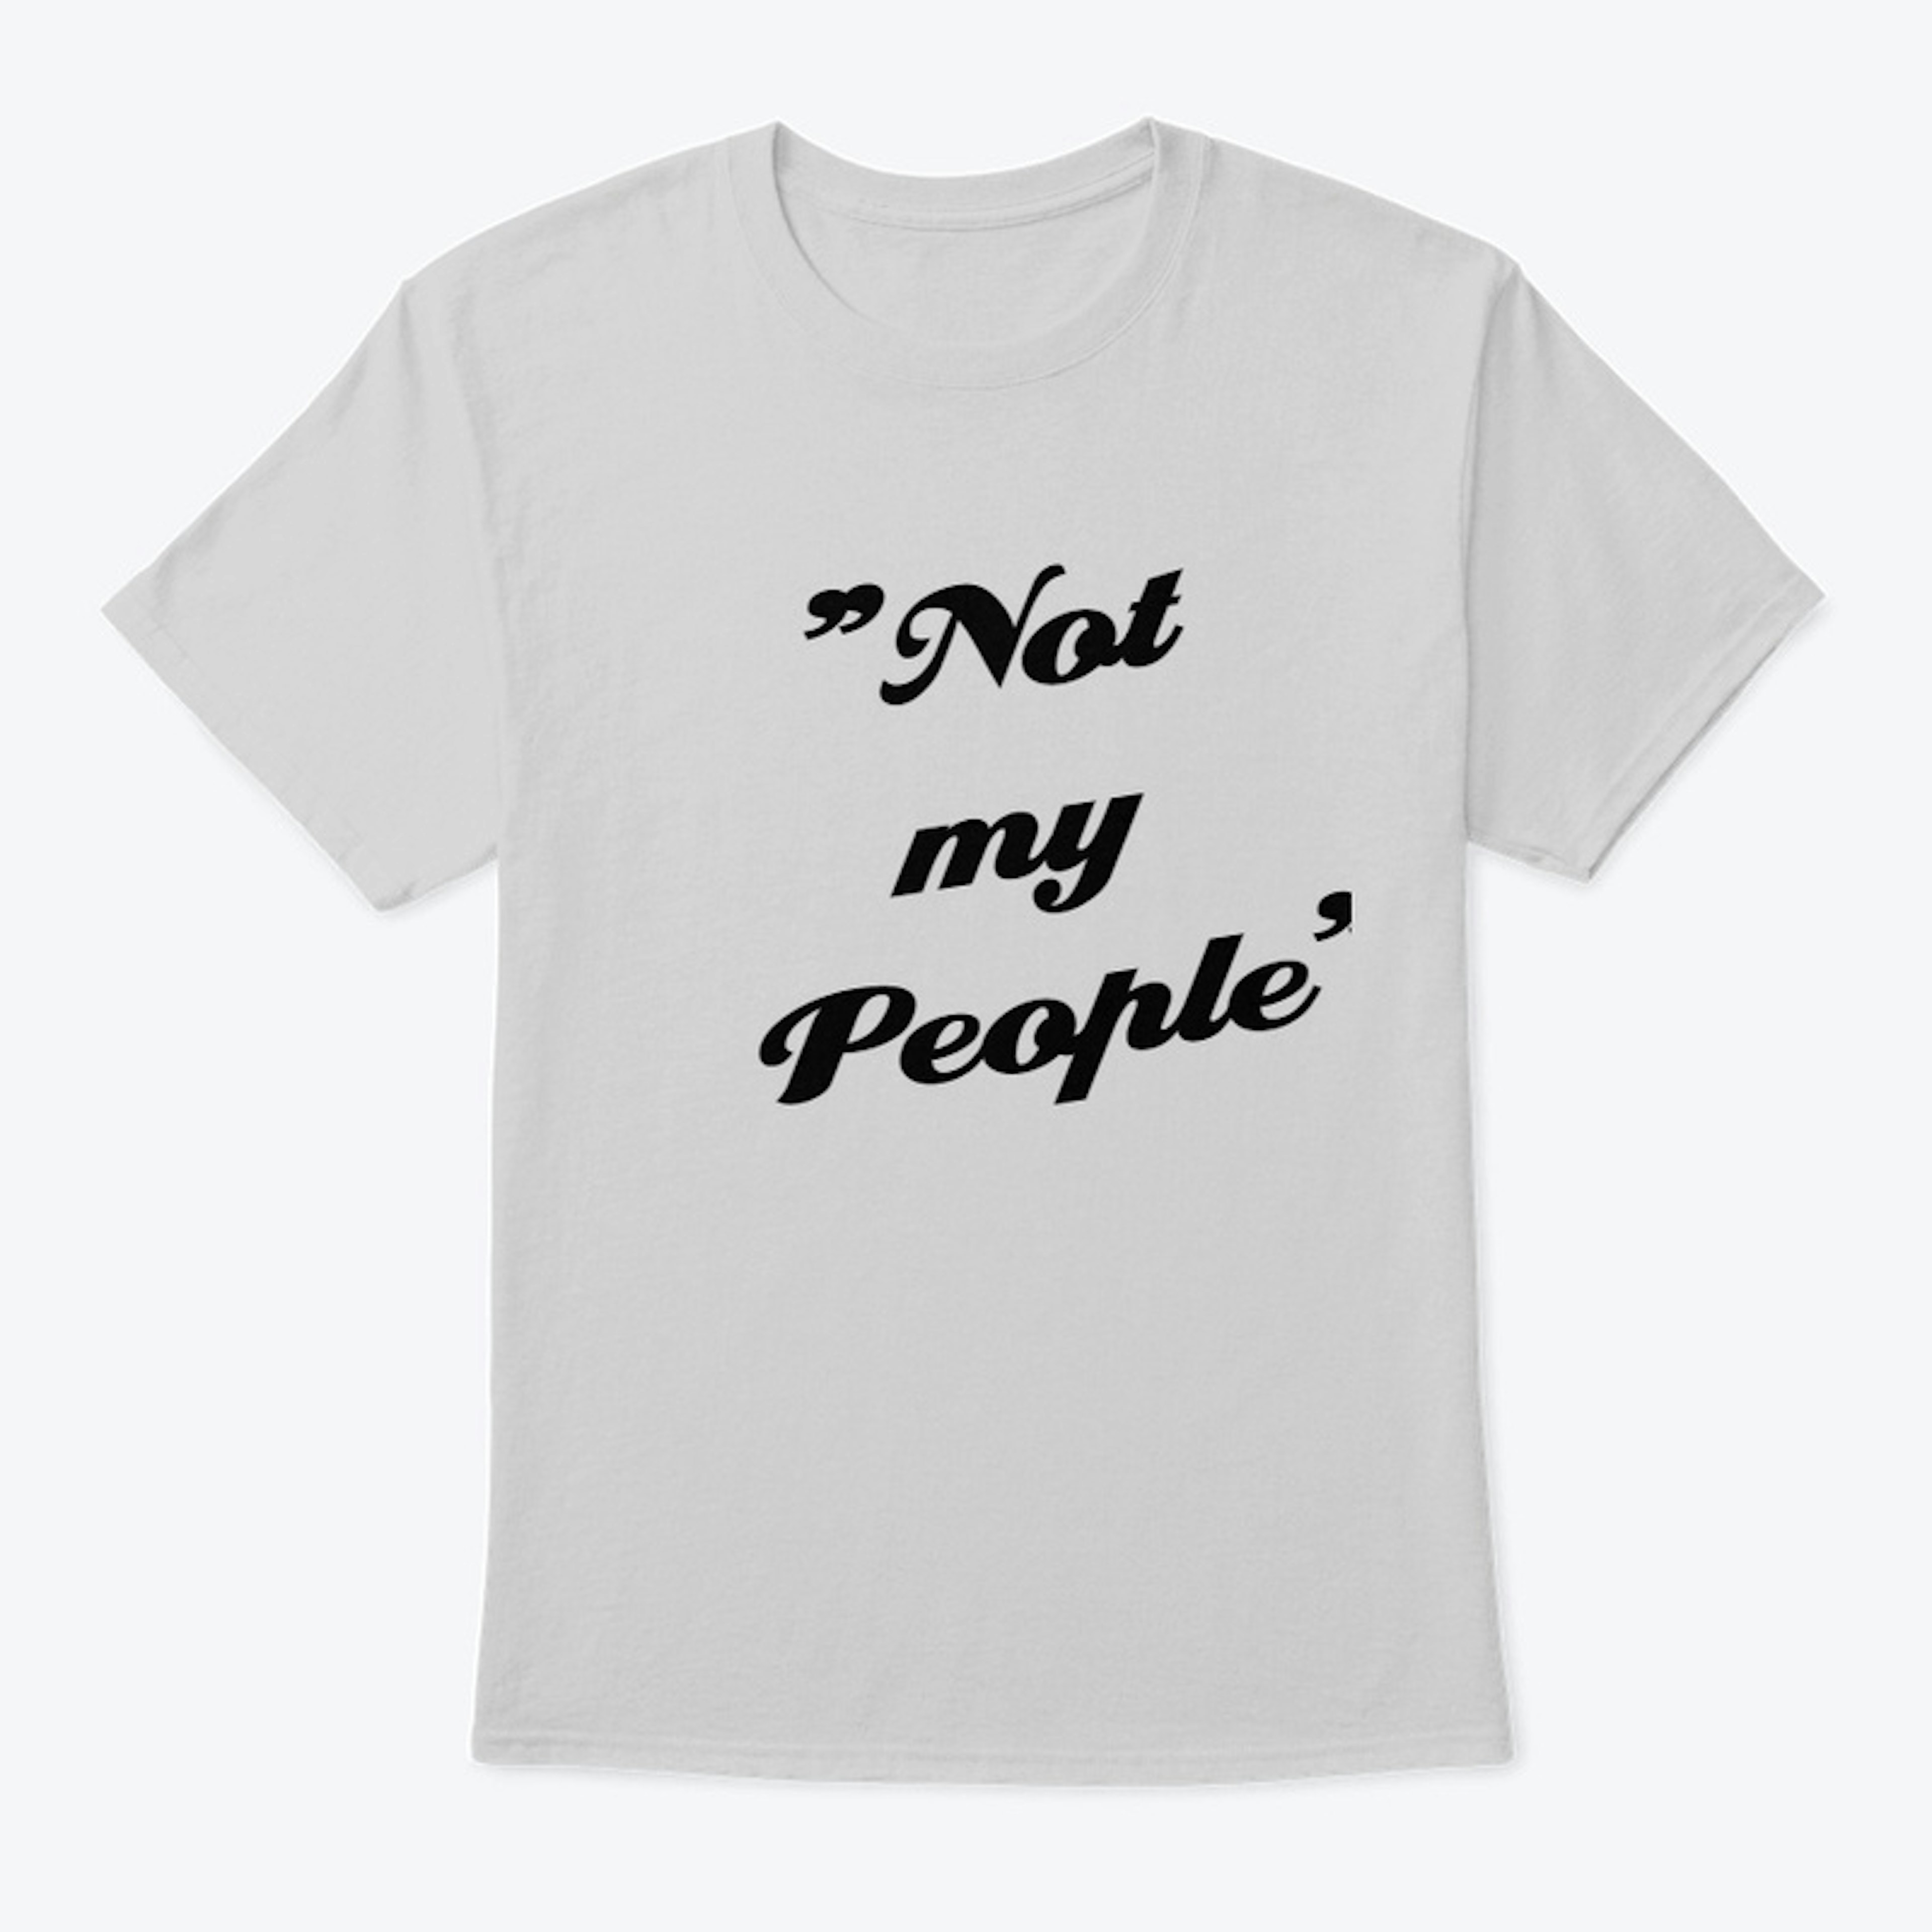 "Not my People"